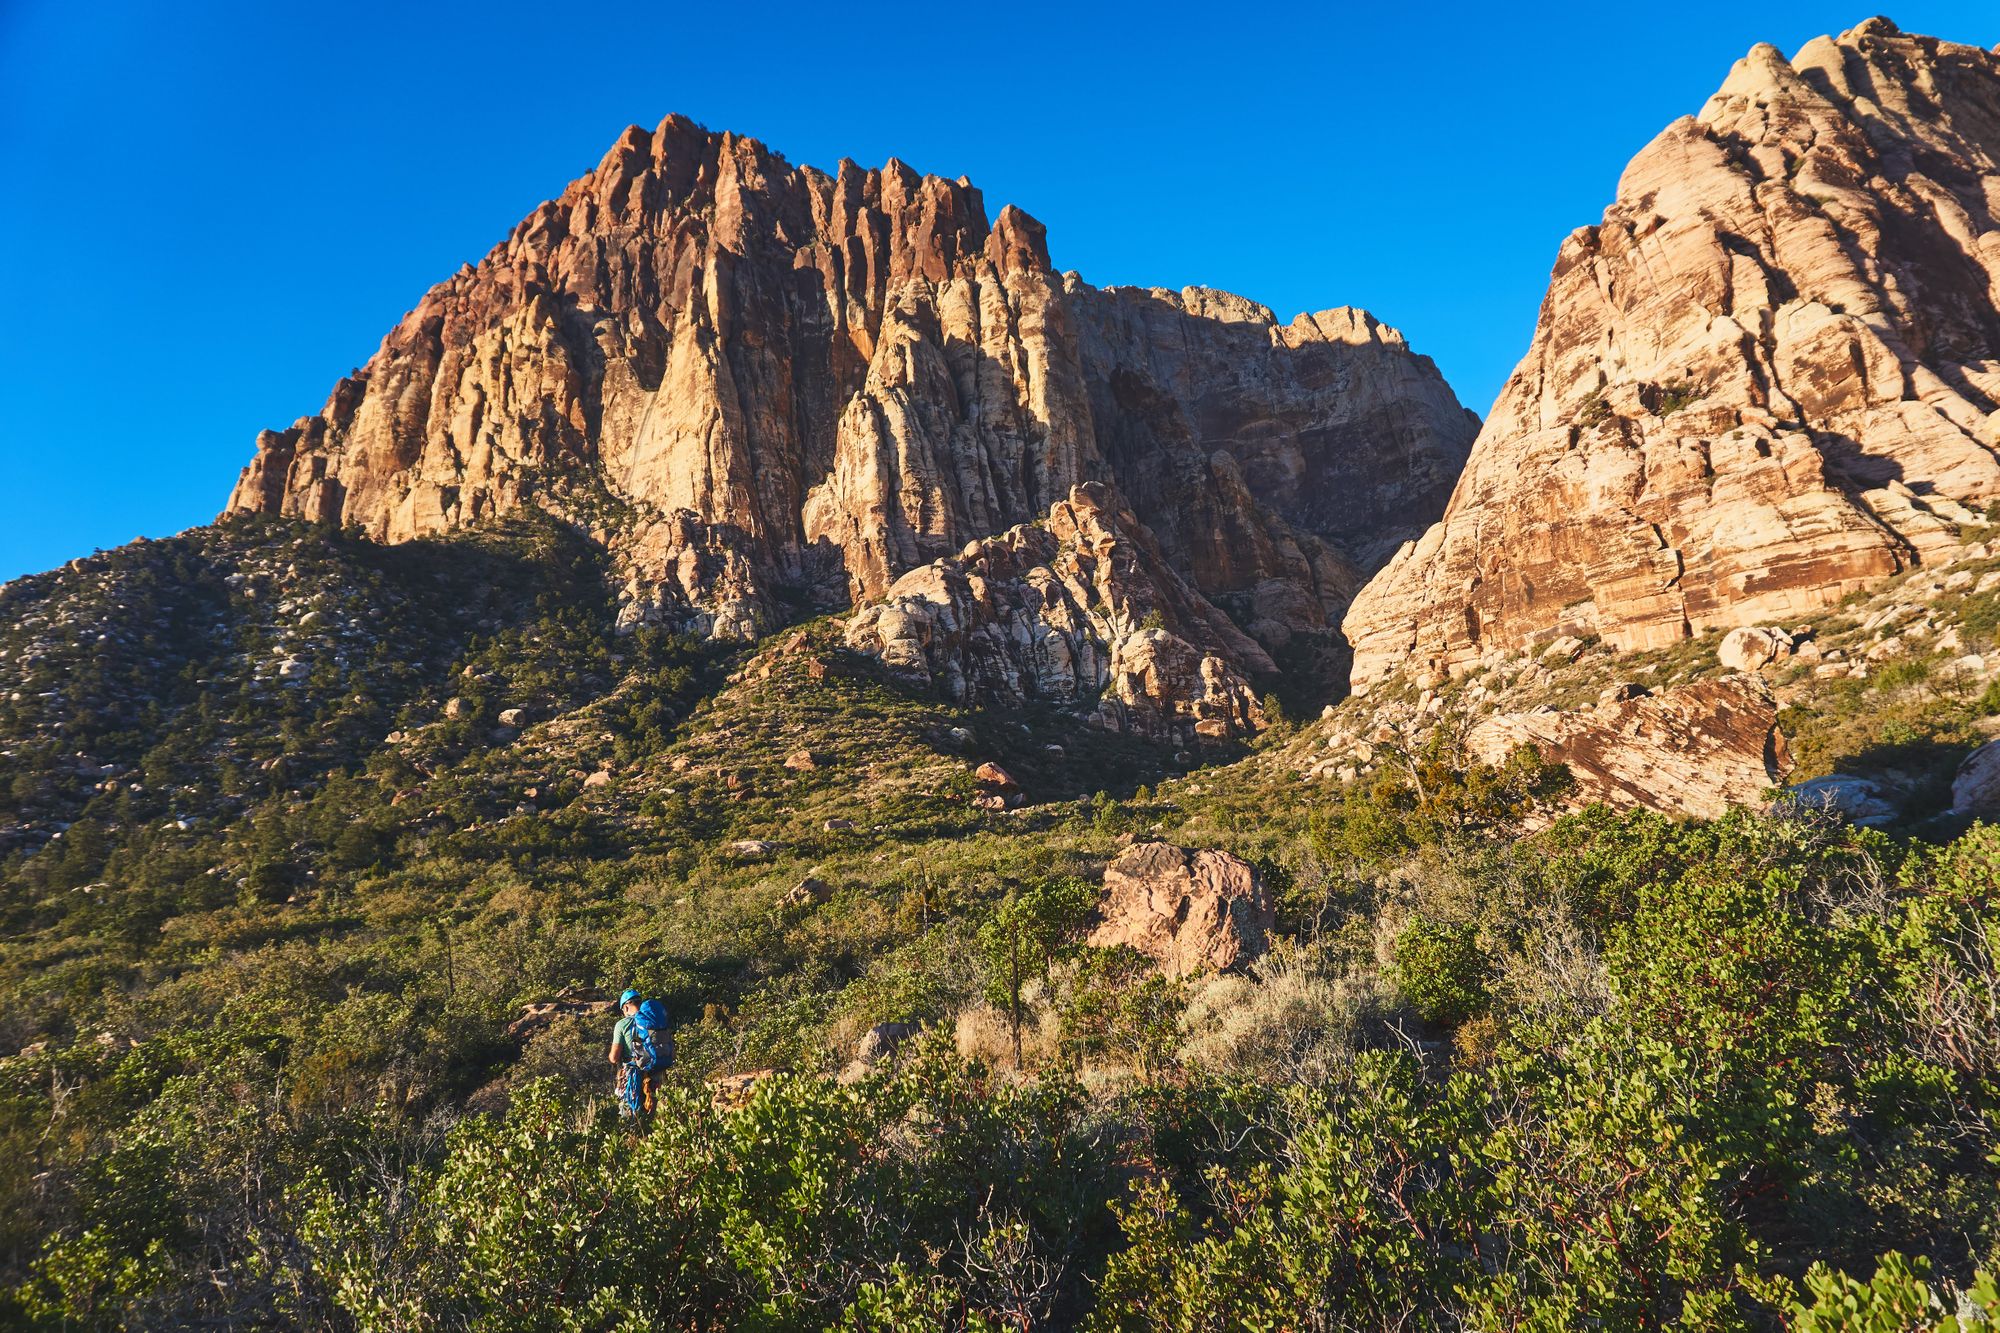 Man hiking to a large sandstone rock formation/mountain in the distance.